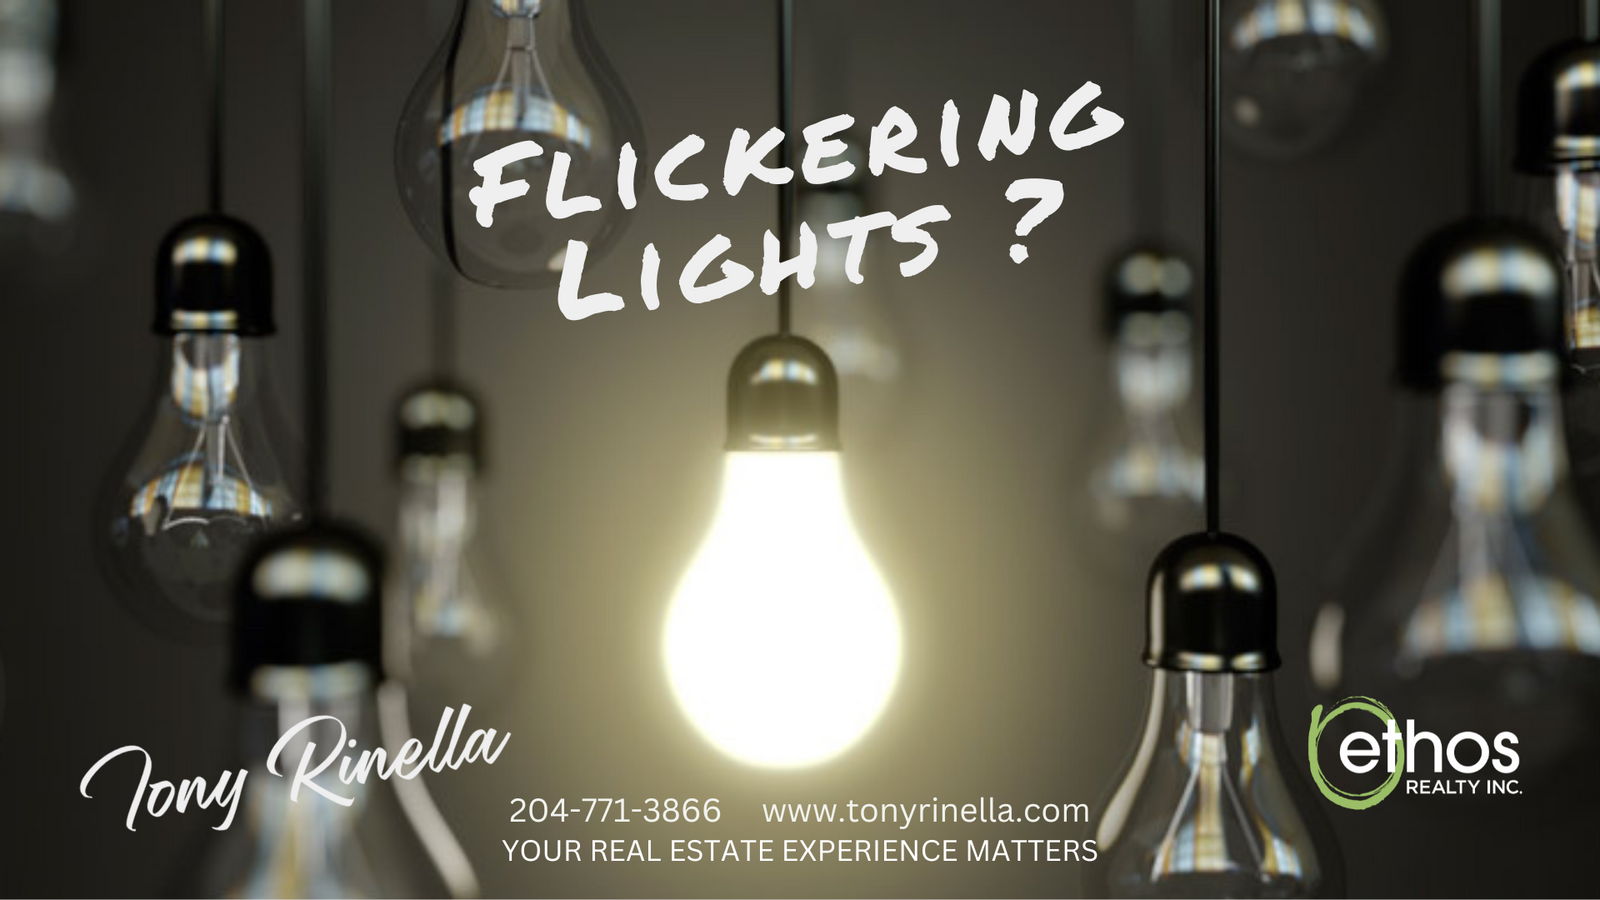 What Causes Flickering or Dimming Lights and What Can You Do to Fix Them?